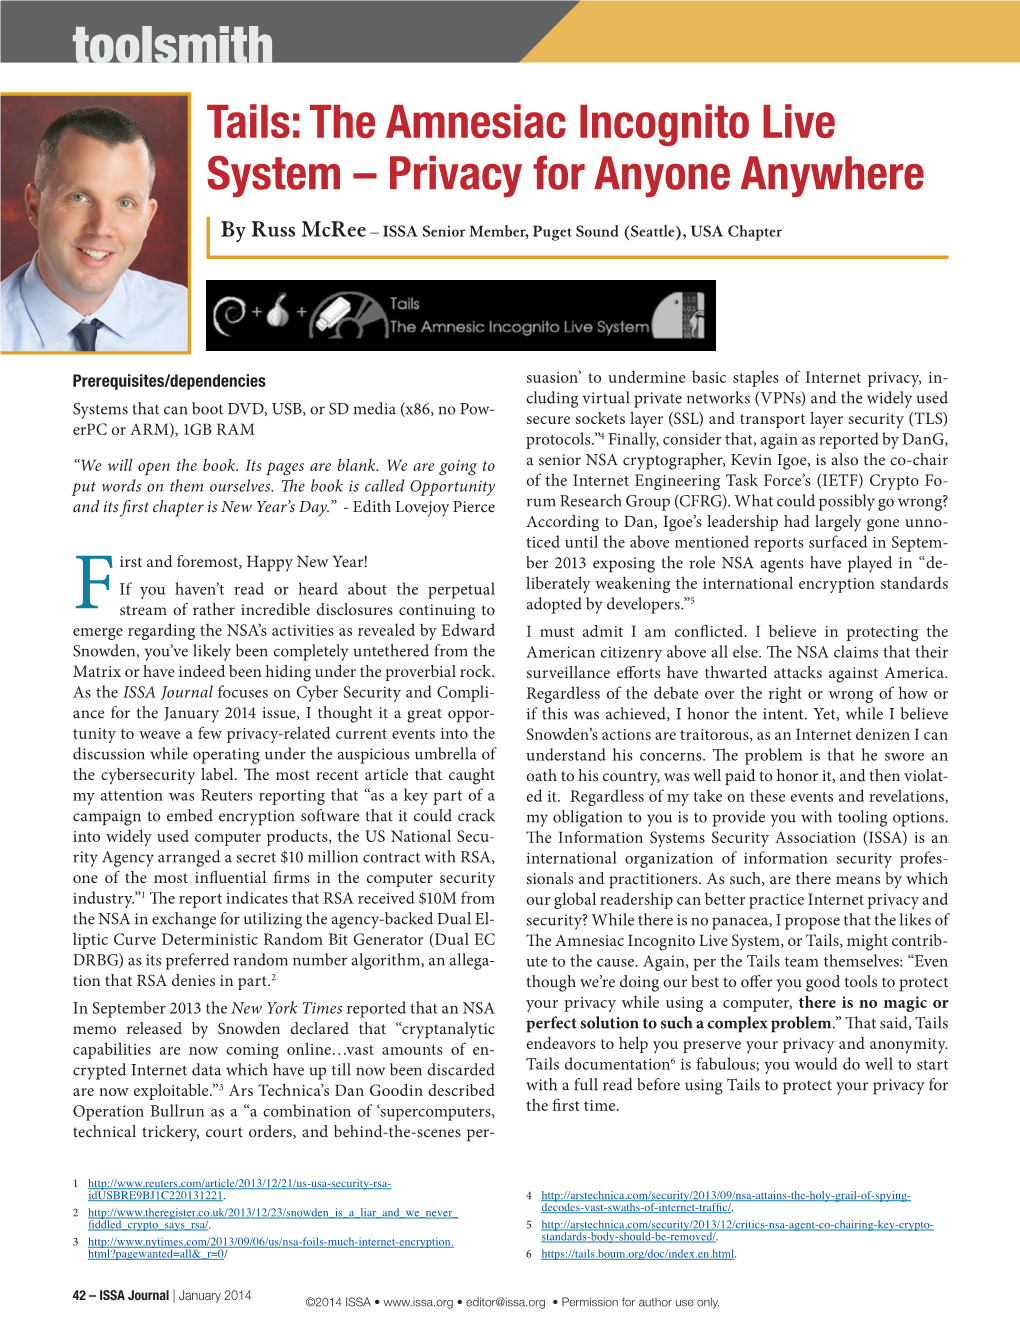 Tails: the Amnesiac Incognito Live System – Privacy for Anyone Anywhere by Russ Mcree – ISSA Senior Member, Puget Sound (Seattle), USA Chapter